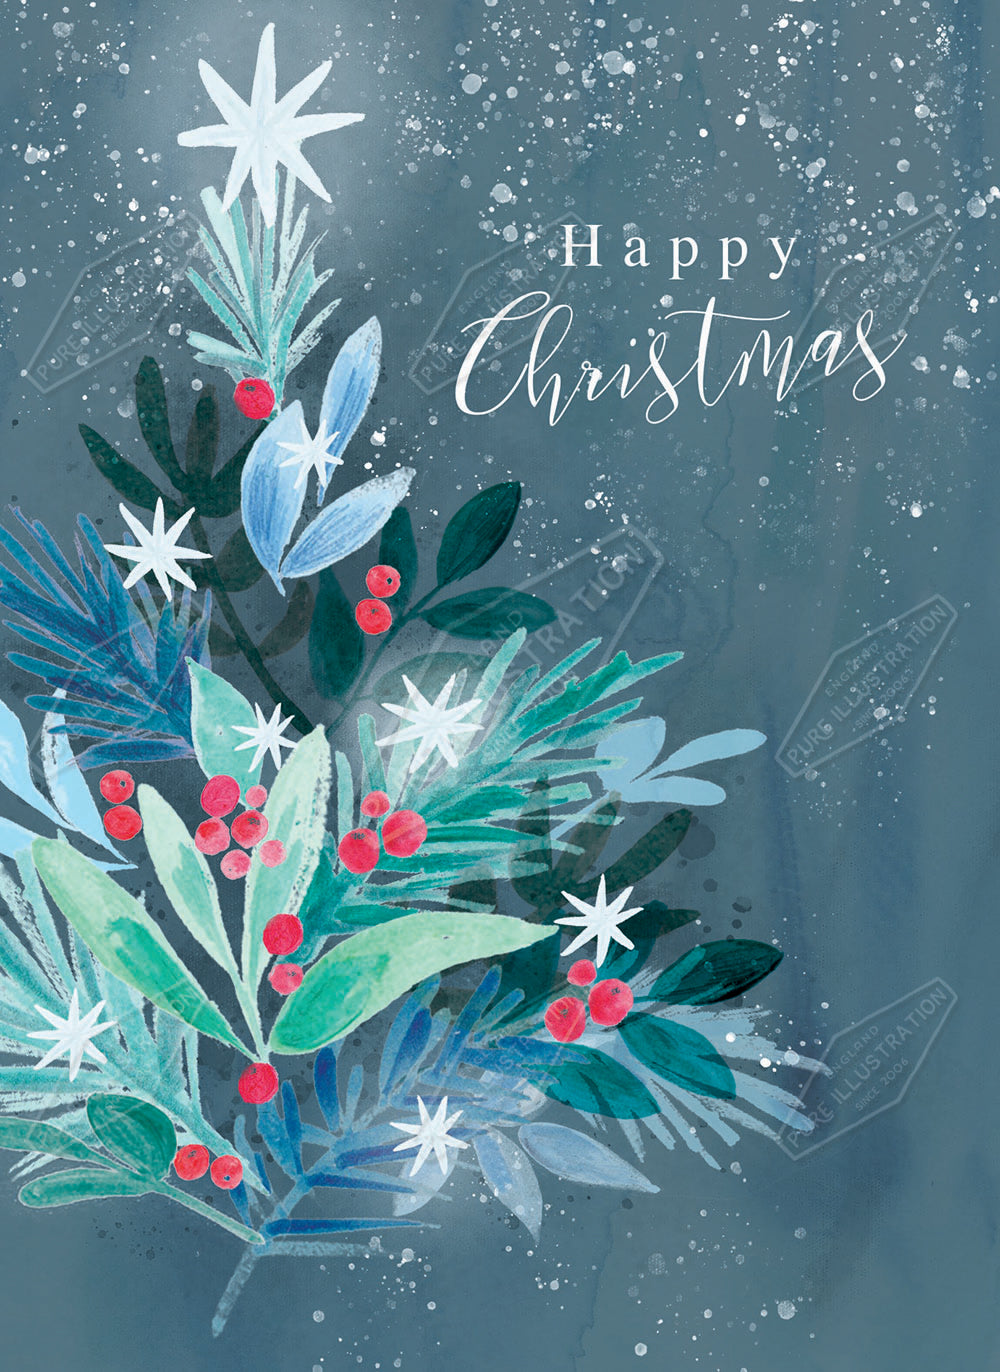 00034699SLA- Sarah Lake is represented by Pure Art Licensing Agency - Christmas Greeting Card Design